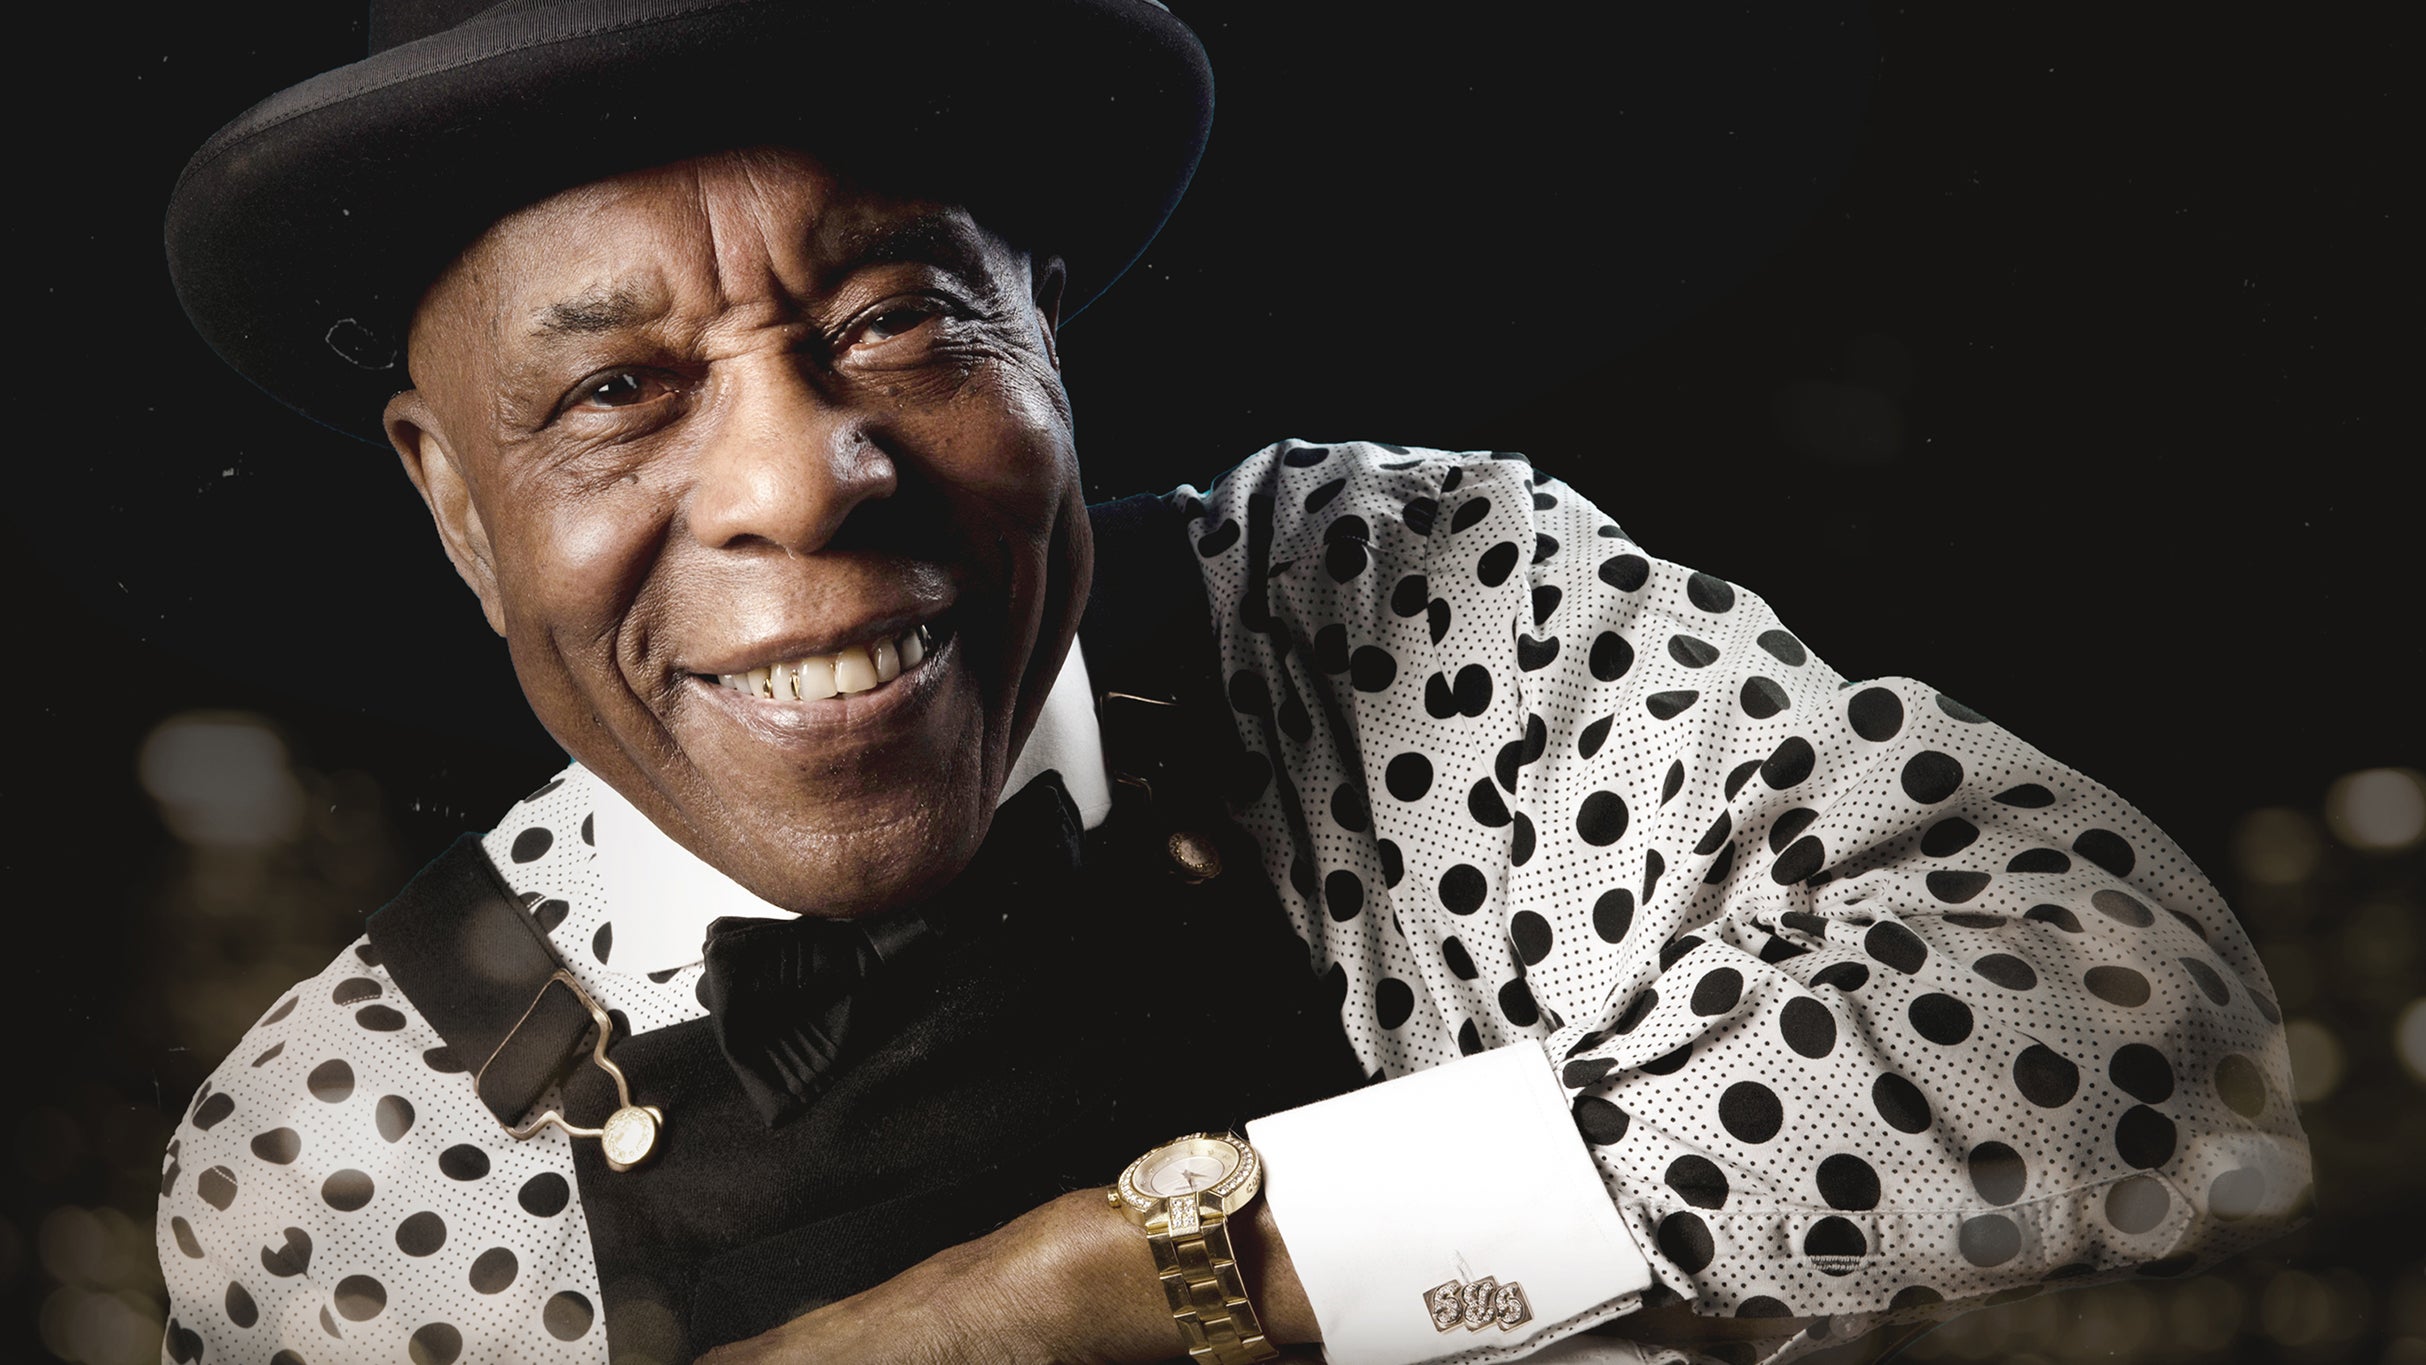 Buddy Guy - Damn Right Farewell at The Factory